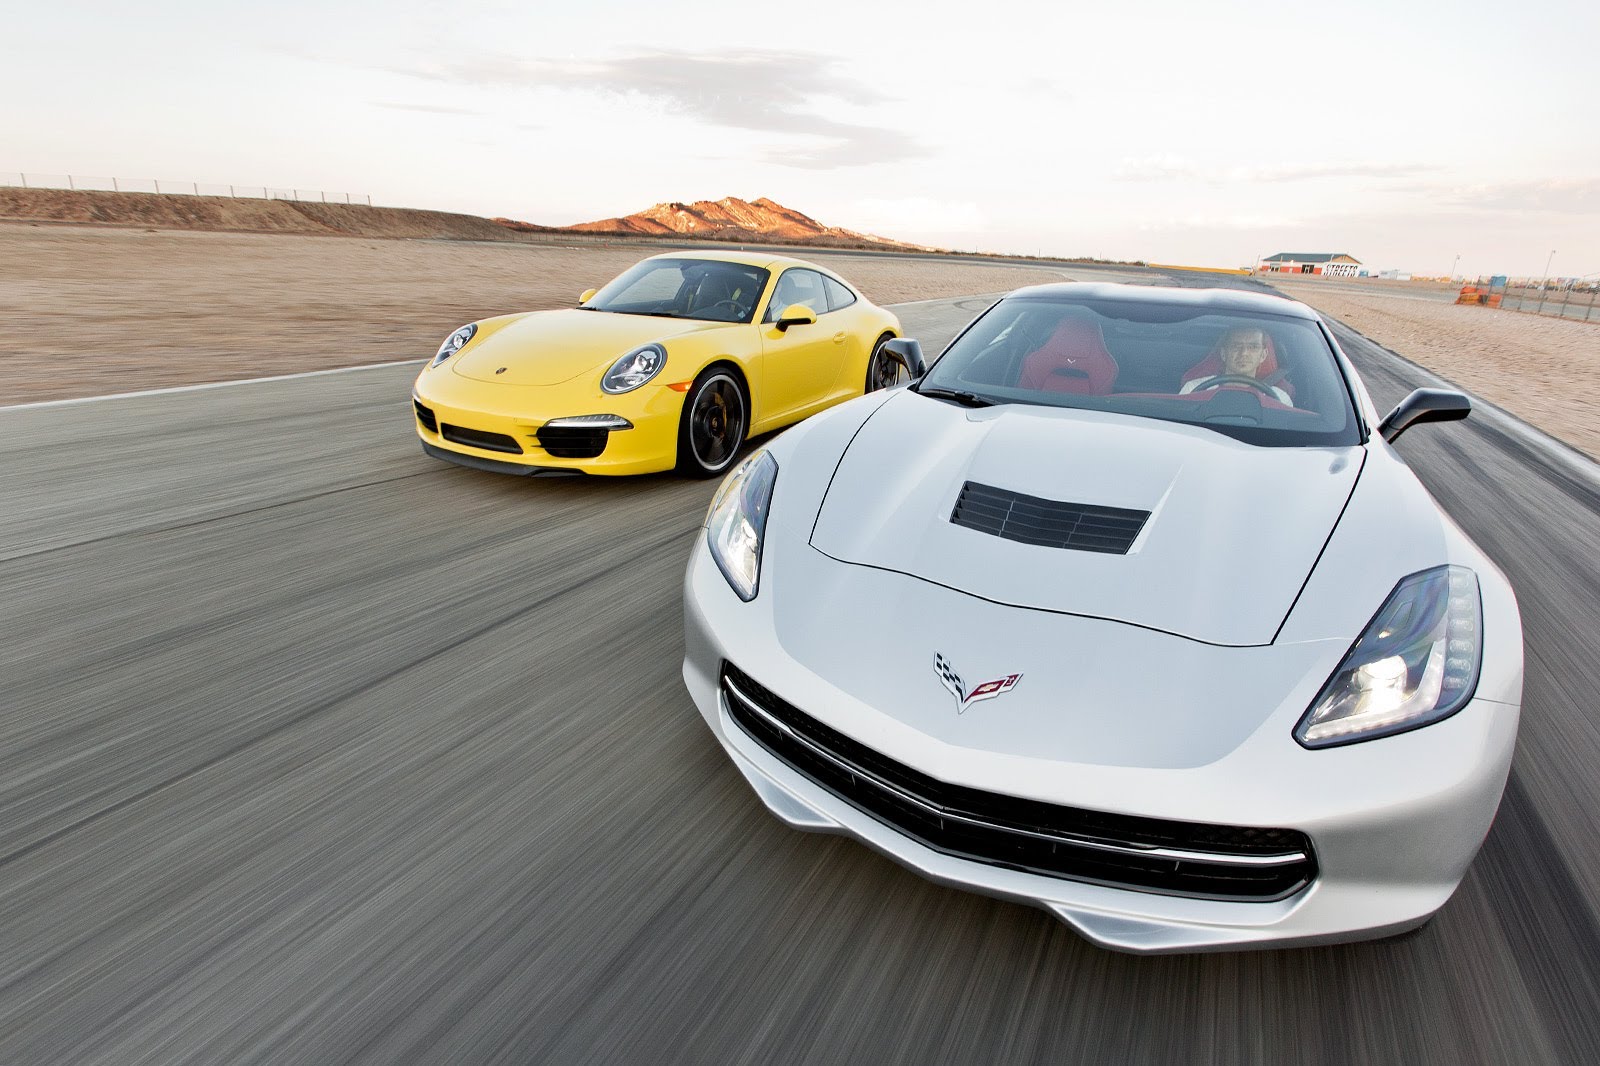 Edmunds Pits the C7 Stingray Against Likely Opponents